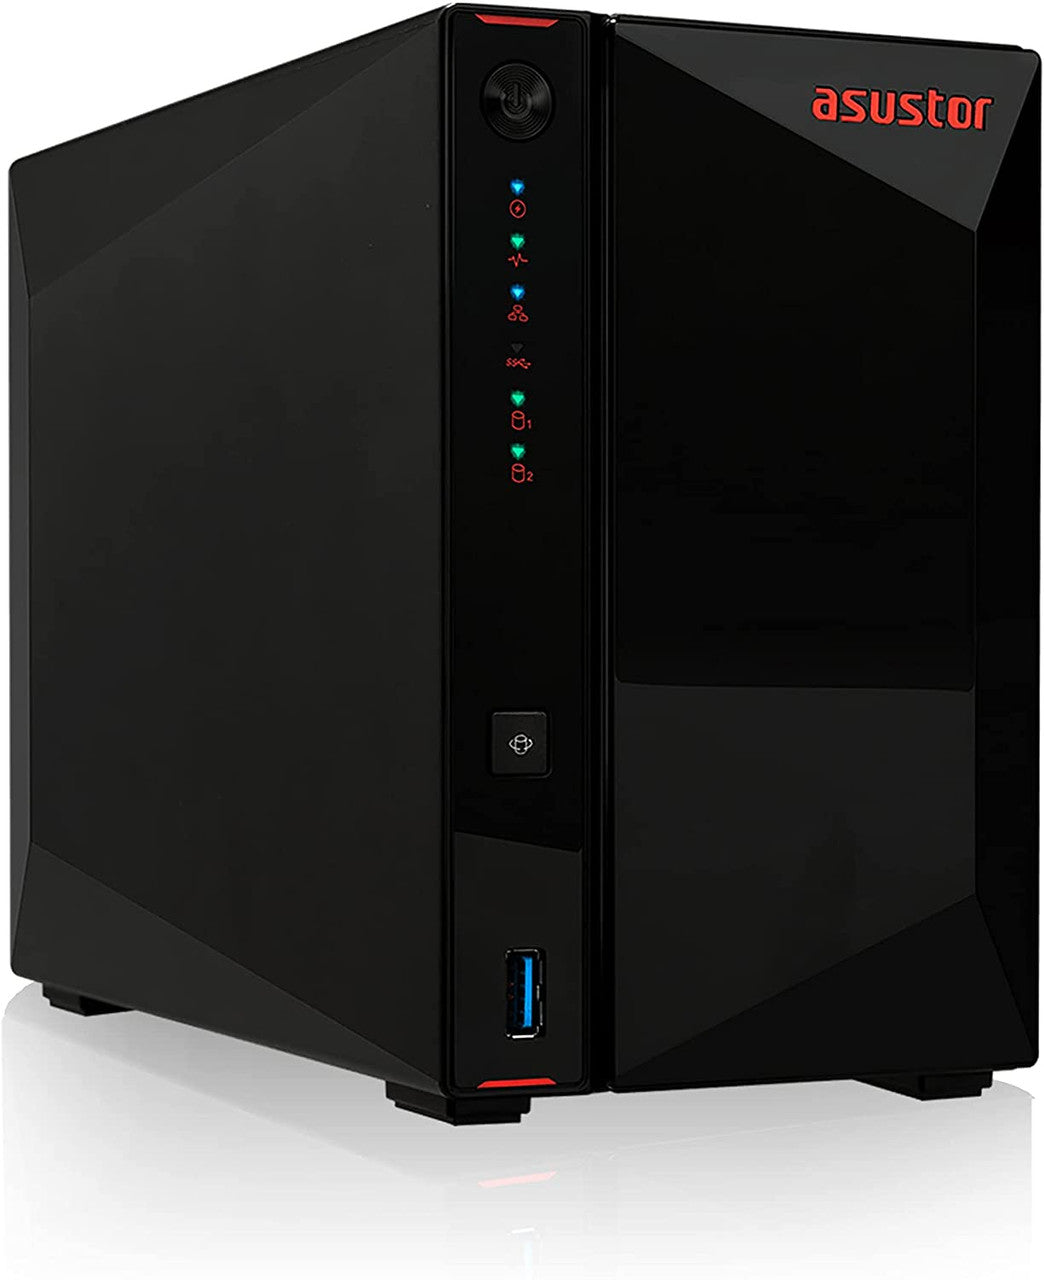 Asustor AS5202T 2-Bay Nimbustor 2 NAS with 8GB RAM and 12TB ( 2x 6TB) Seagate Ironwolf NAS Drives Fully Assembled and Tested